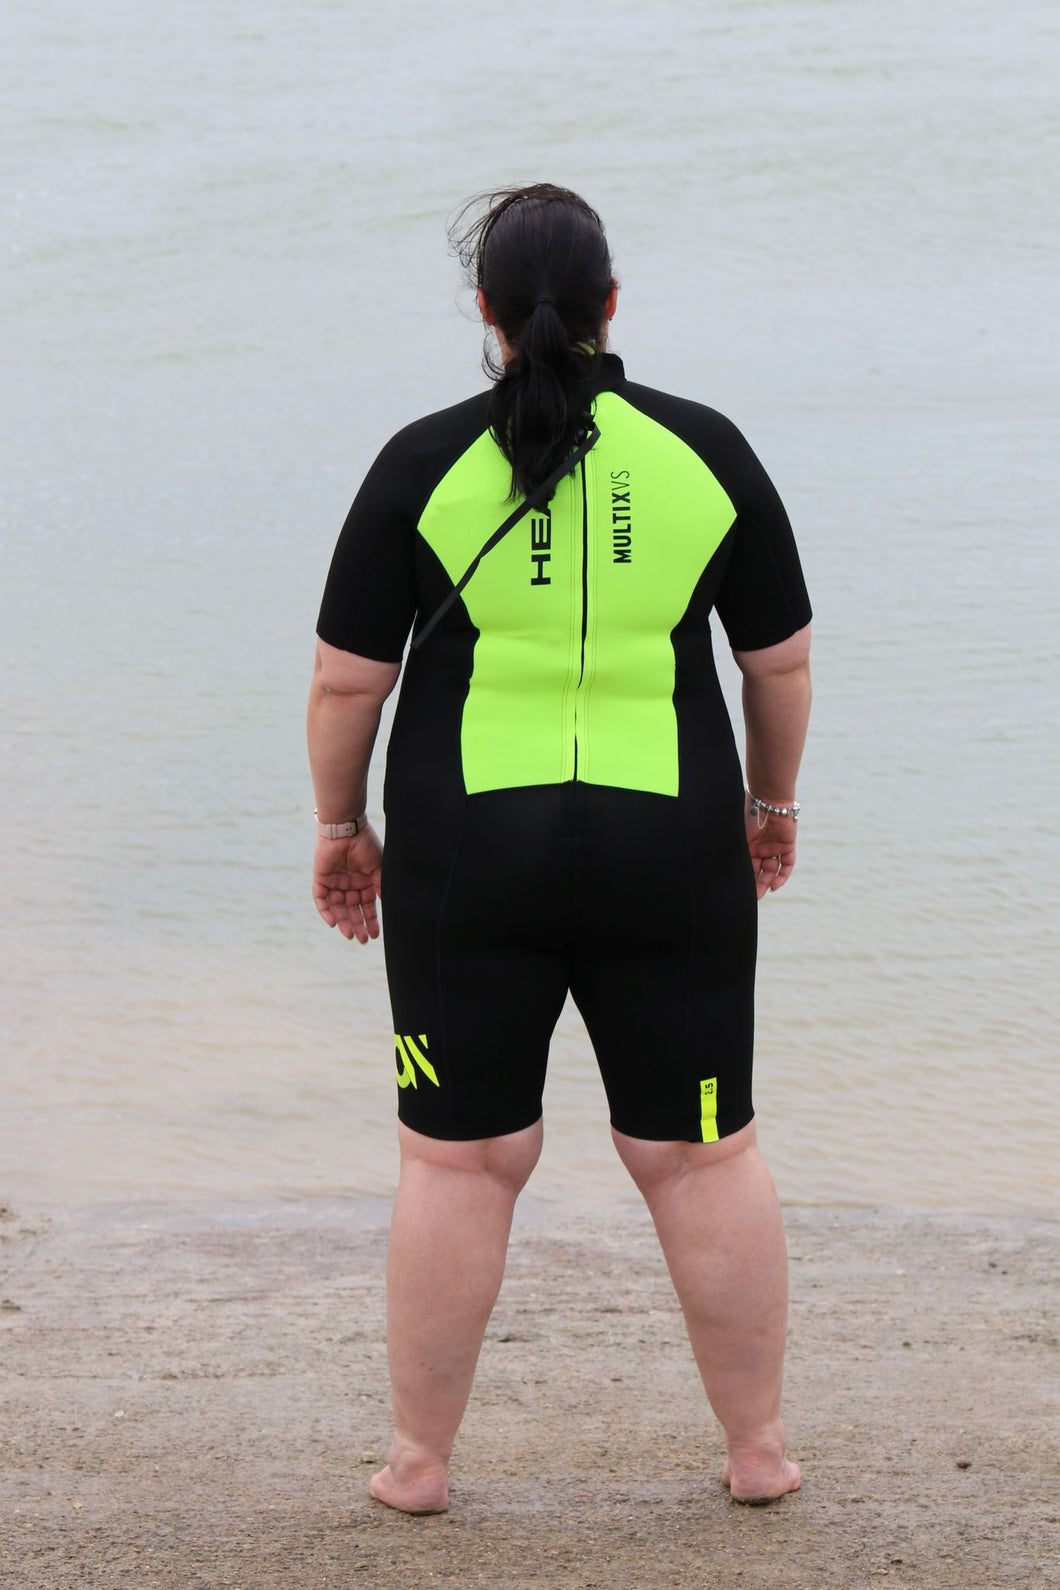 HEAD Multix Watersports Wetsuit - Plus Sizes Available up to 120kg